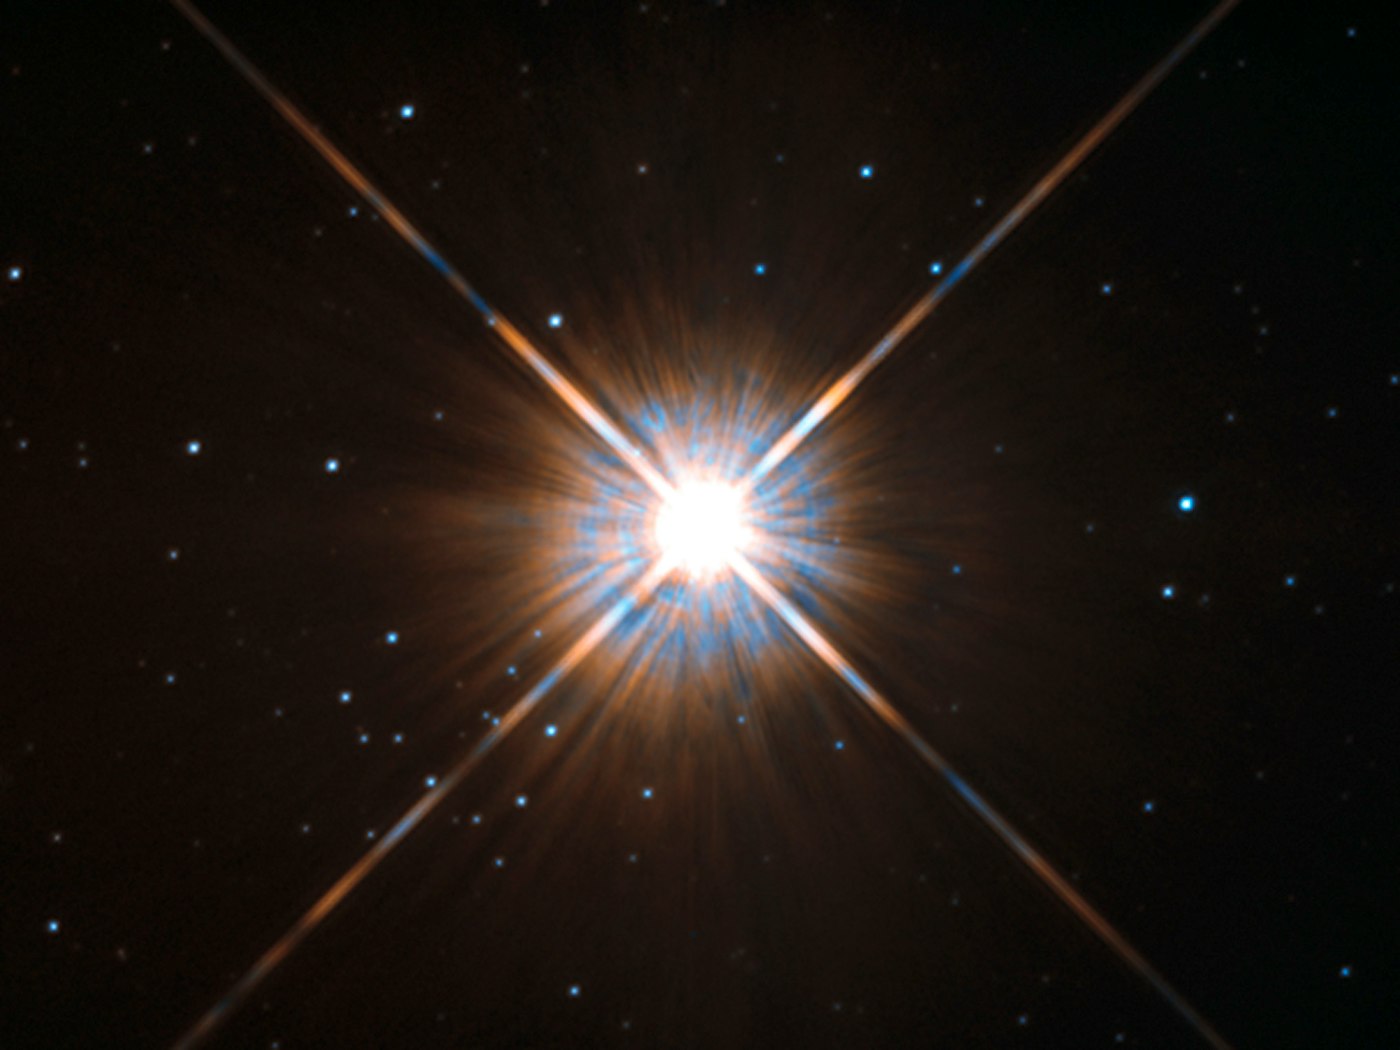 Shining brightly in this Hubble image is our closest stellar neighbour: Proxima Centauri.